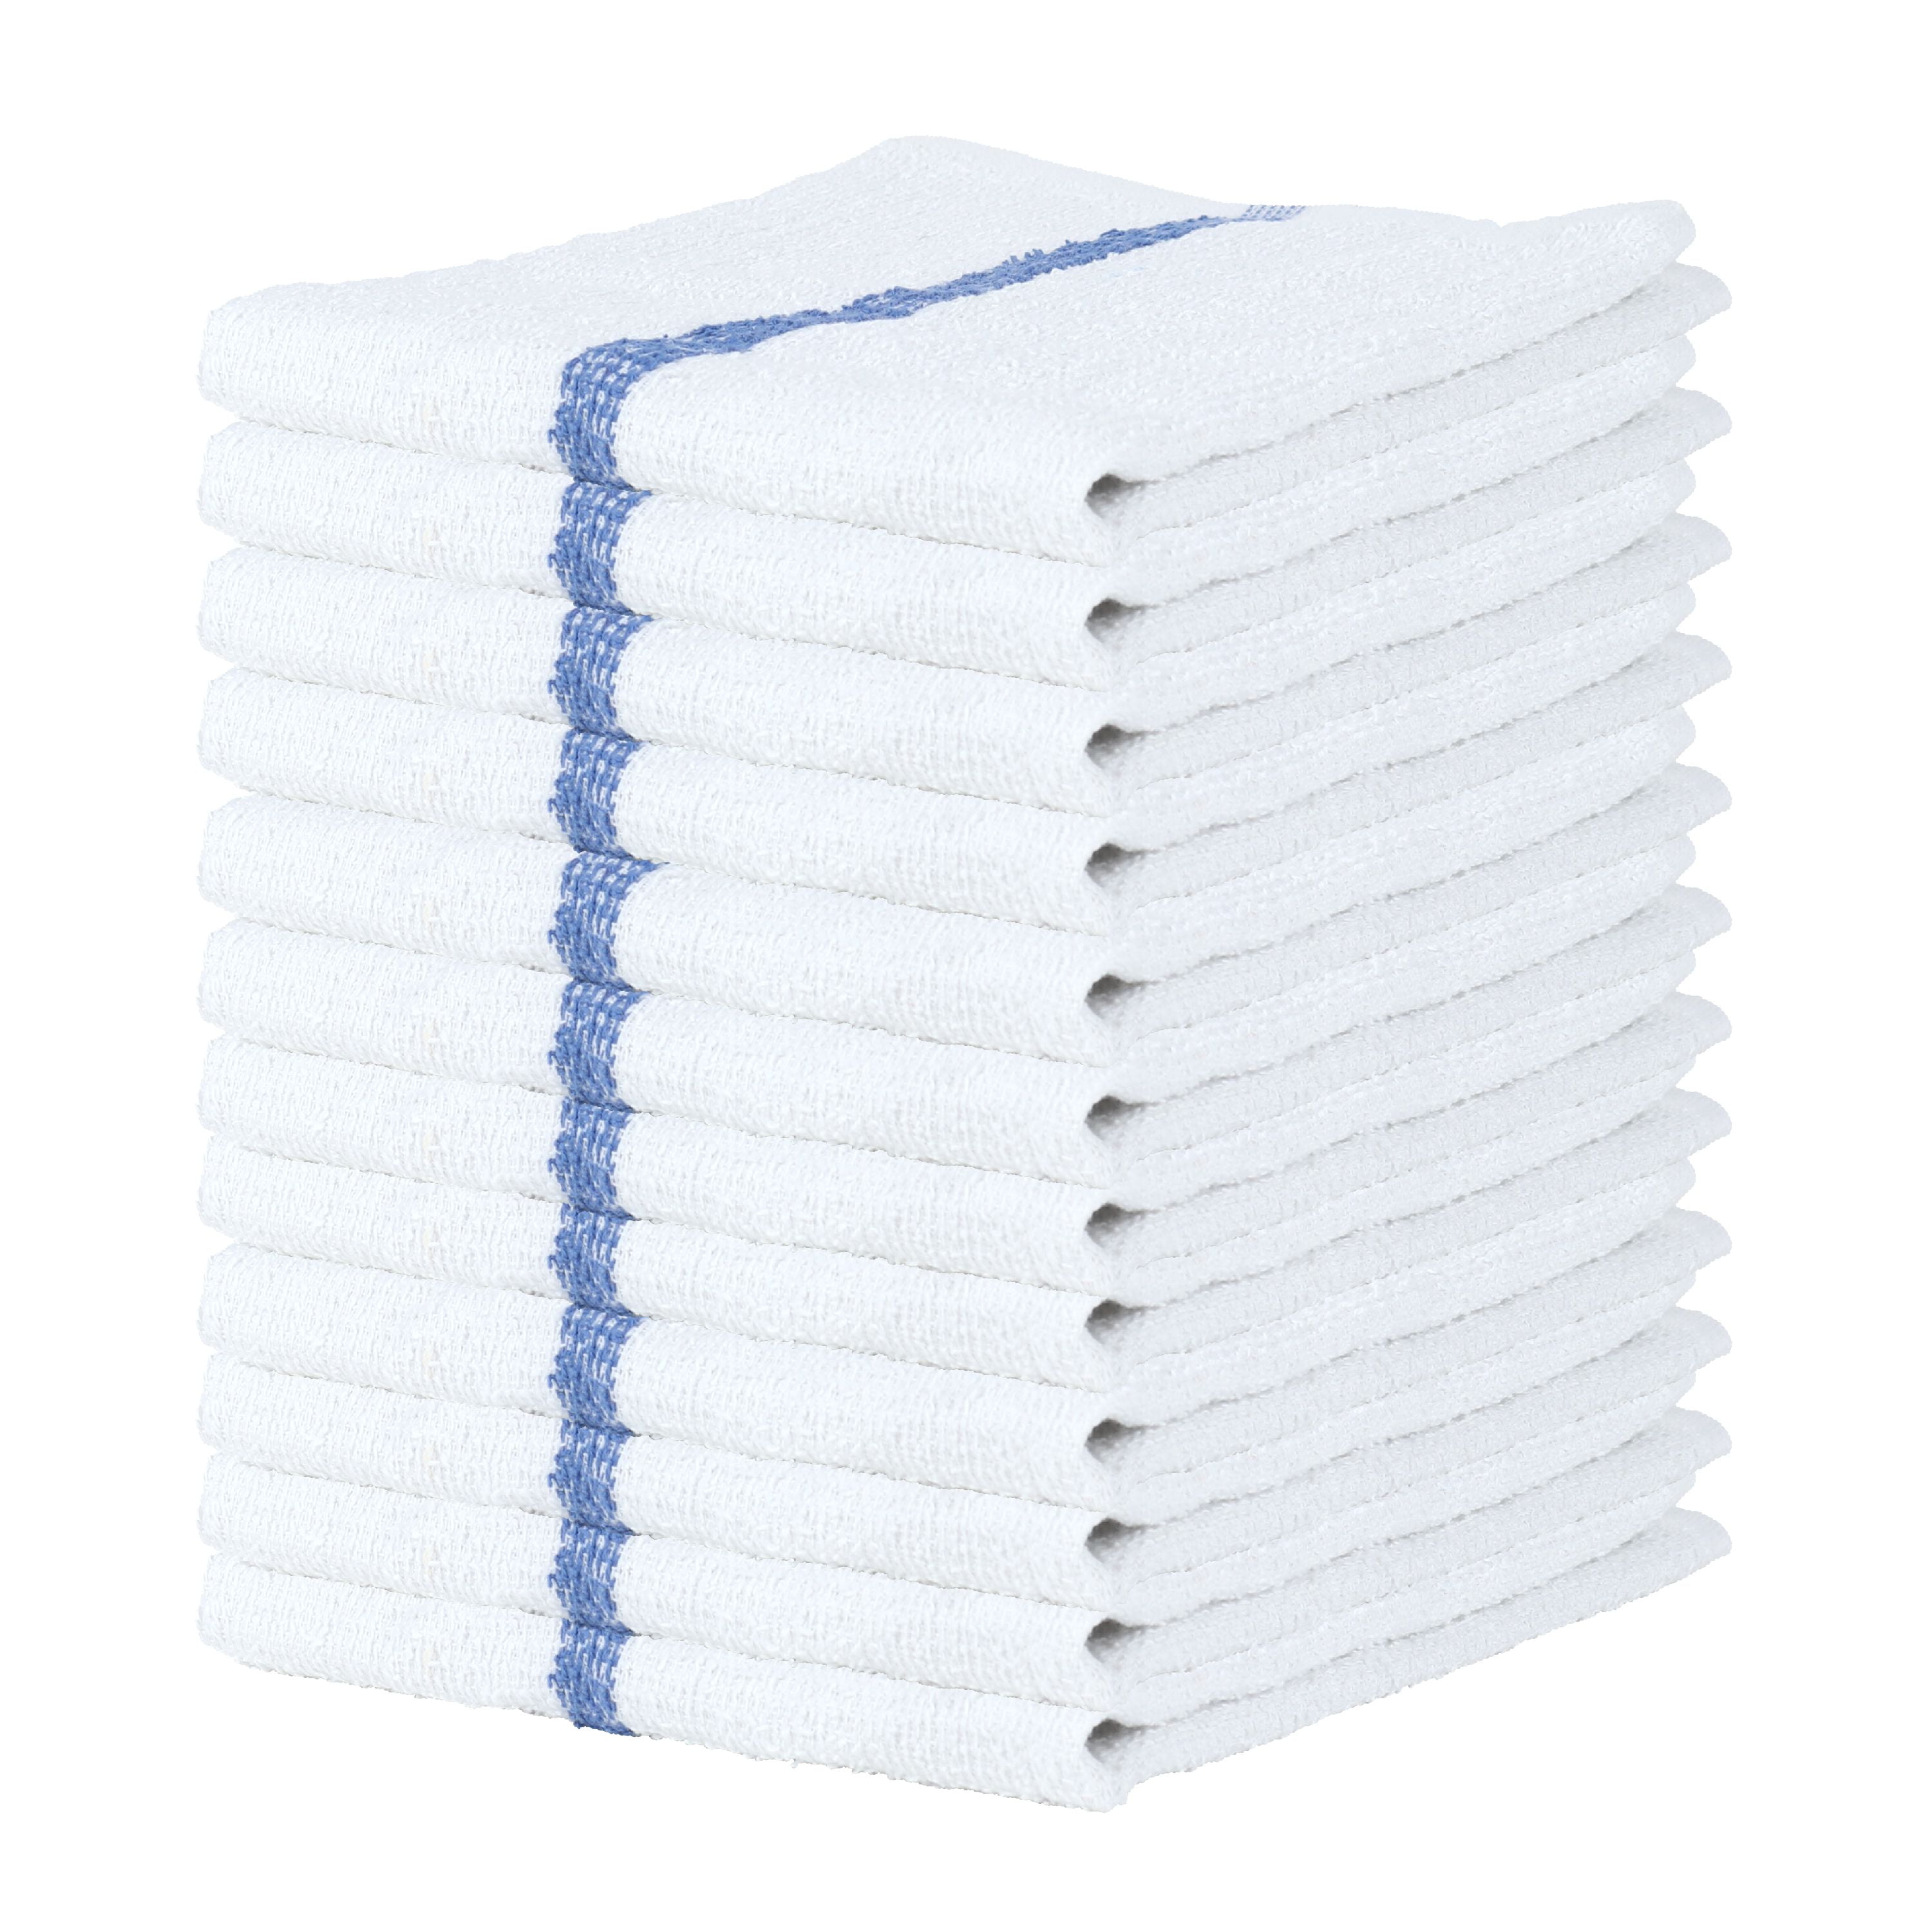 16x19 Professional Quality for Restaurant and Home use 24 Pack- White Blue Kitchen All-Purpose Bar Mop Towels 